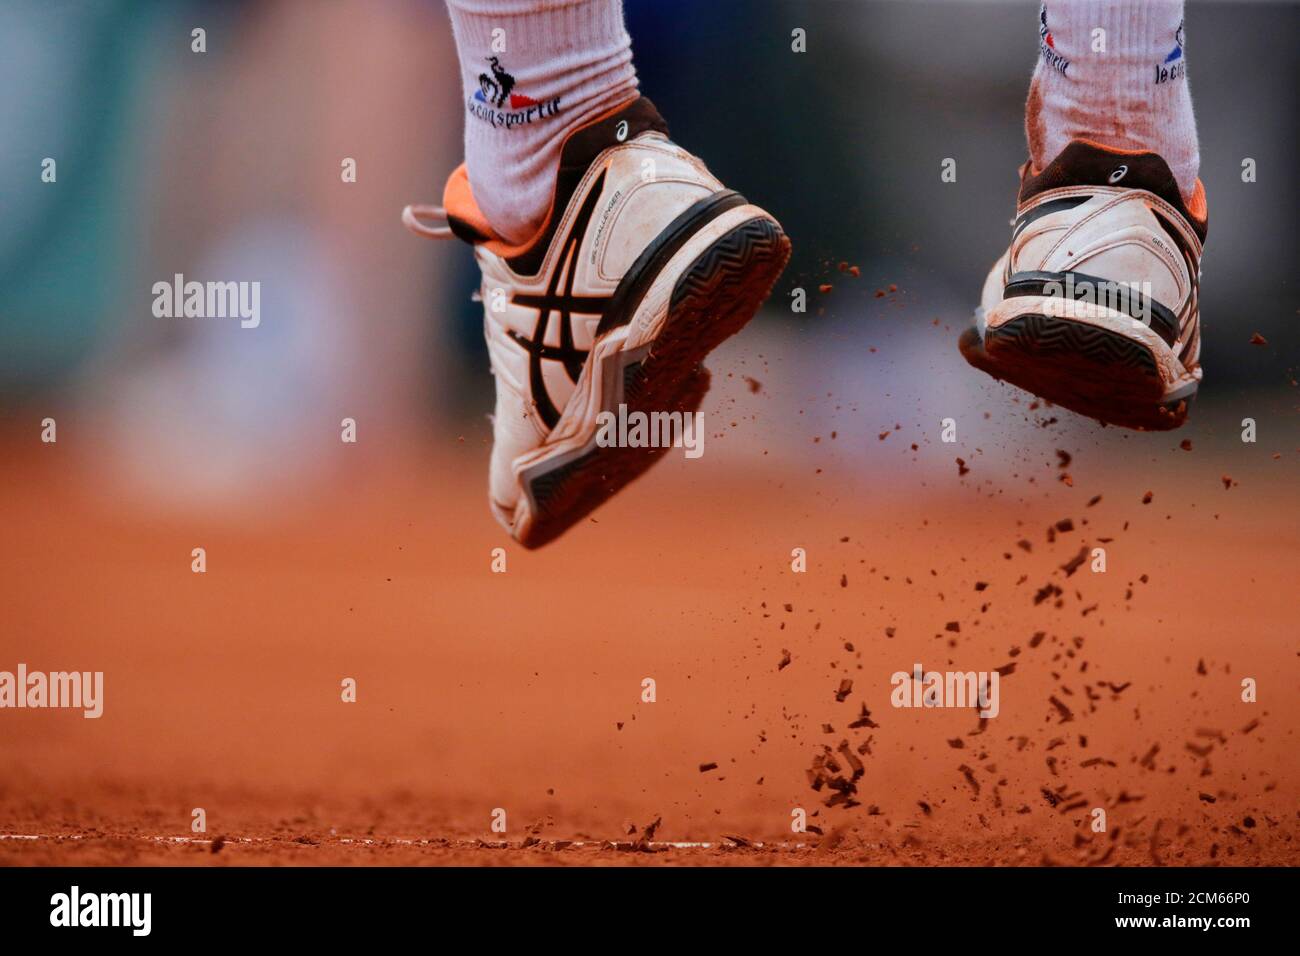 Tennis - French Open - Roland Garros - Kei Nishikori of Japan v Richard  Gasquet of France - Paris, France - 29/05/16. The shoes of Gasquet are seen  as he serves. REUTERS/Gonzalo Fuentes Stock Photo - Alamy